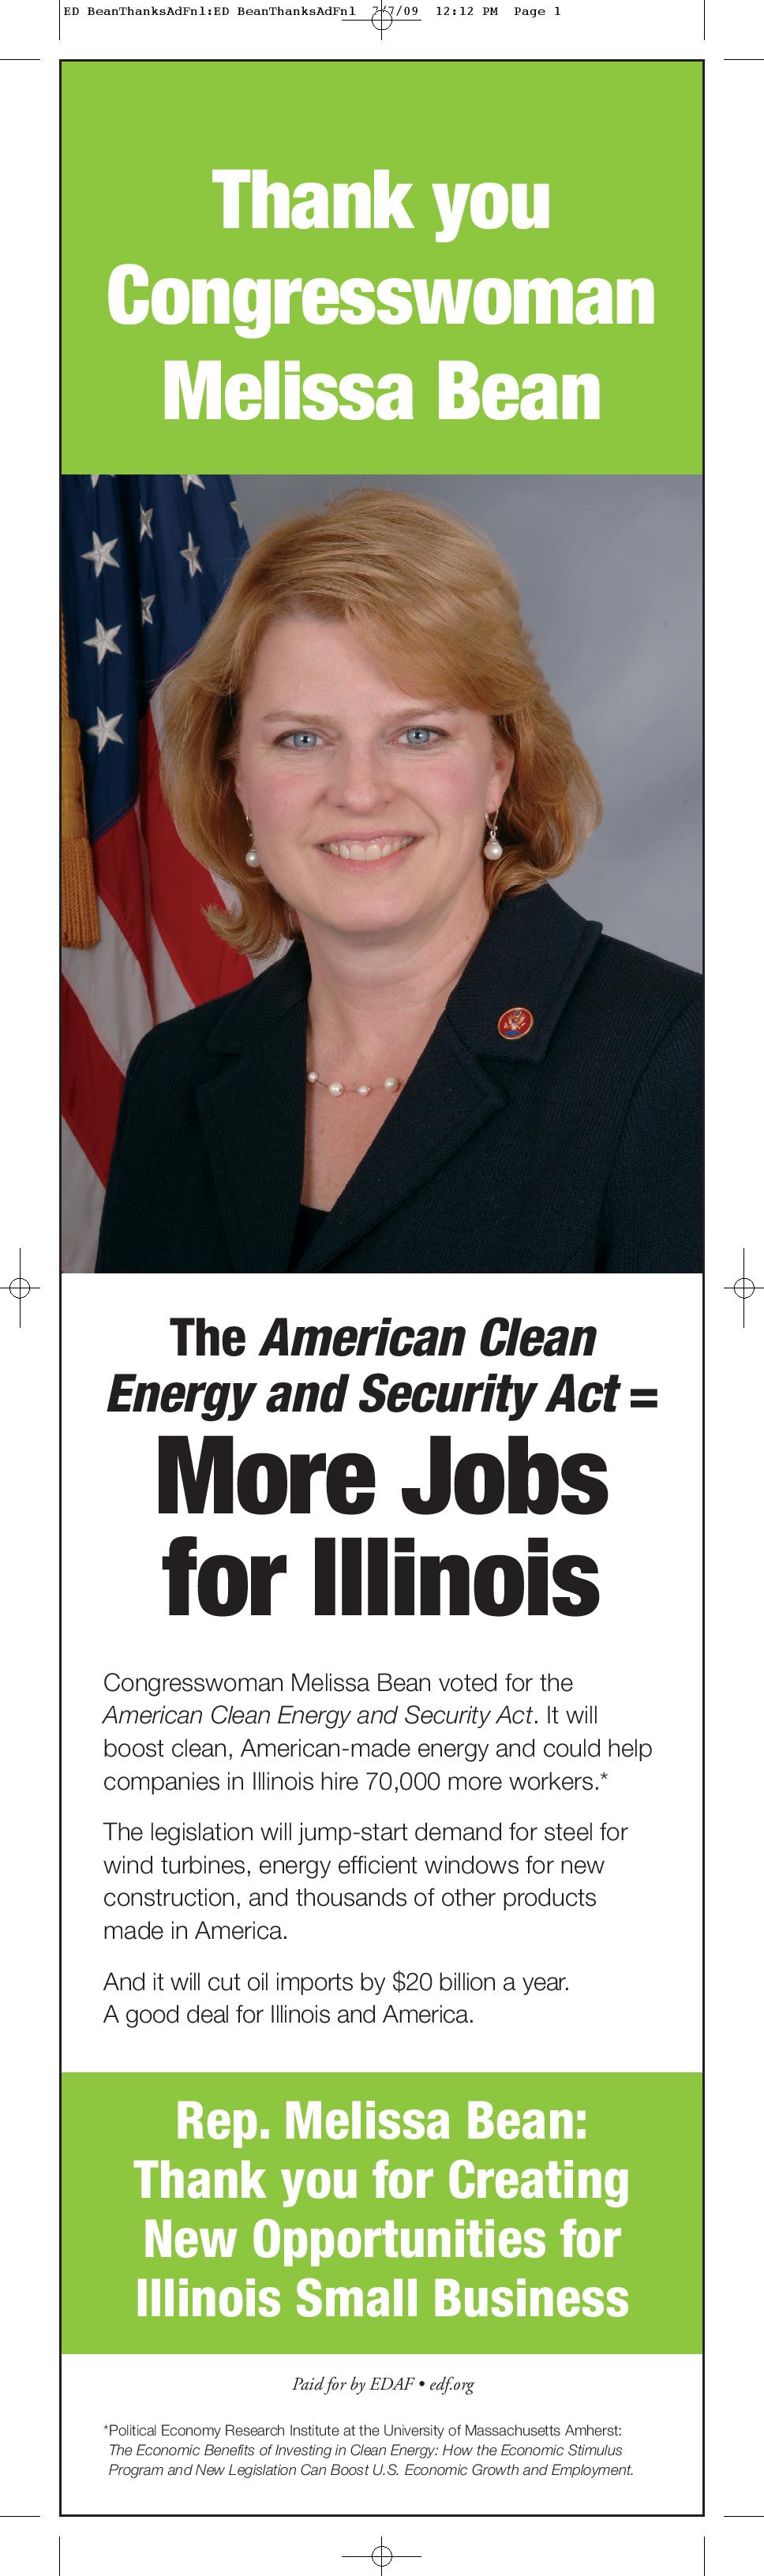 Thank You for Supporting the American Clean Energy and Security Act: Rep. Melissa Bean